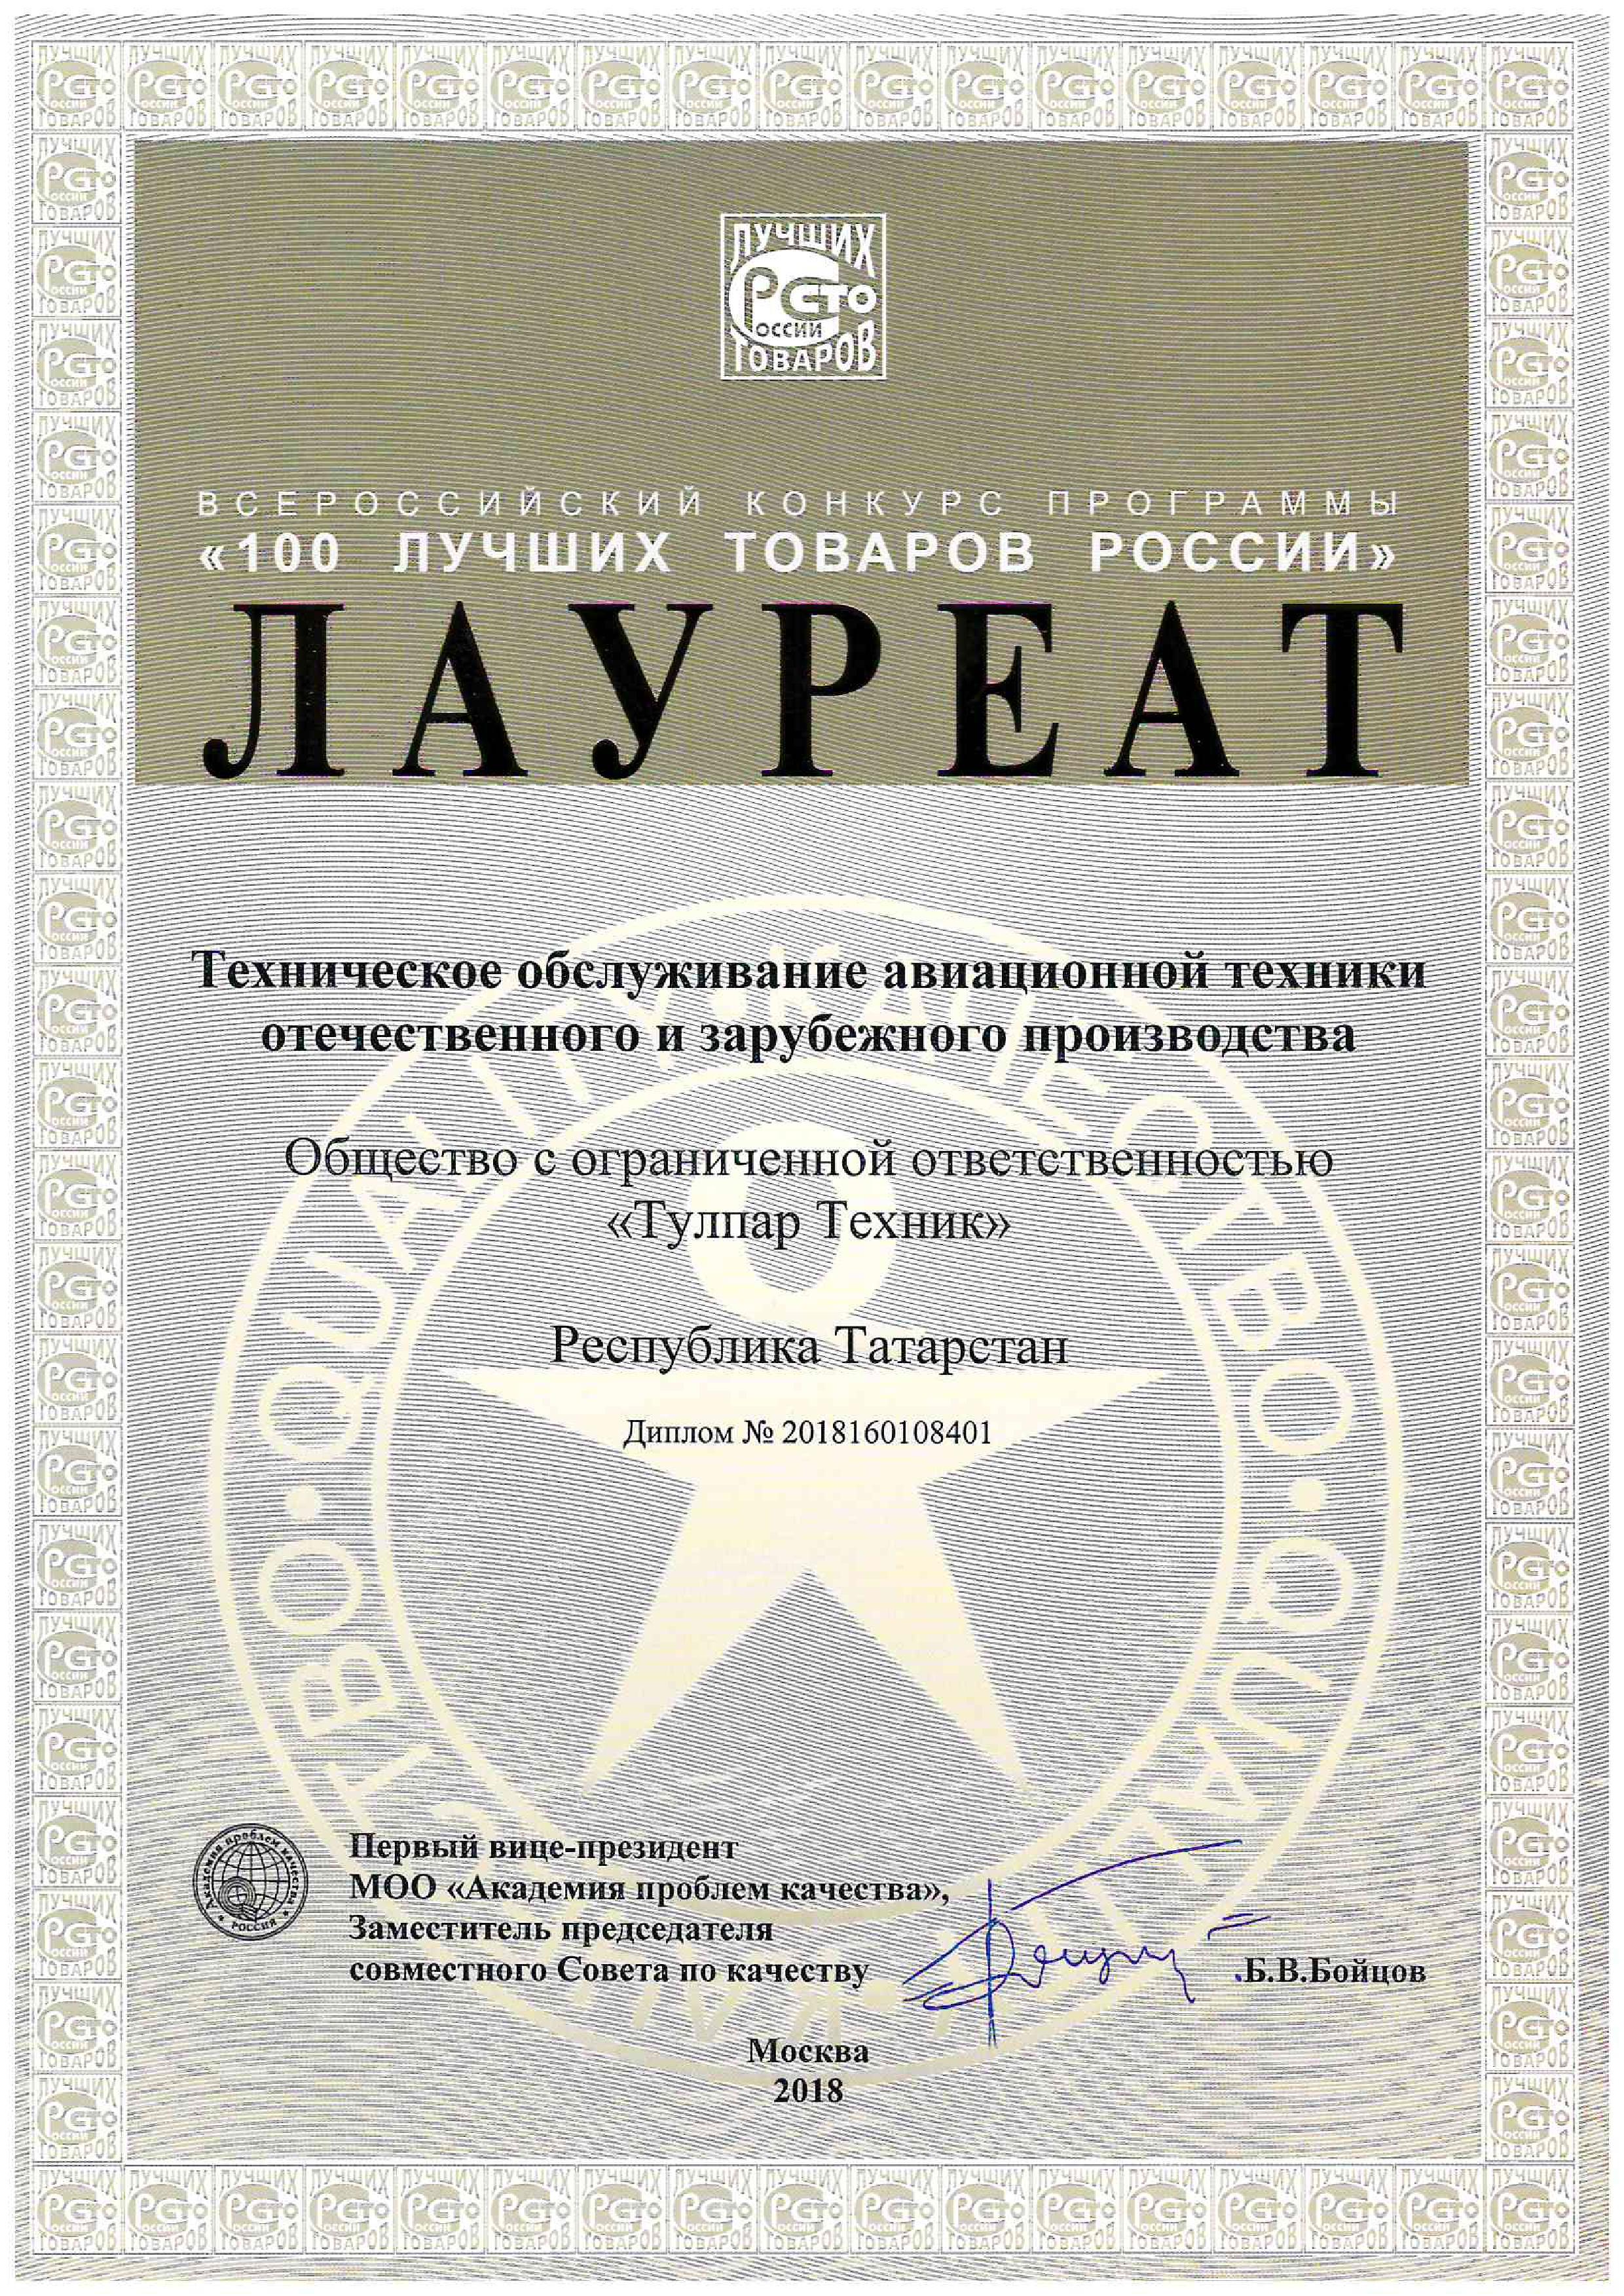 Award “100 best products of Russia” in nomination “Aircraft maintenance” (2018)